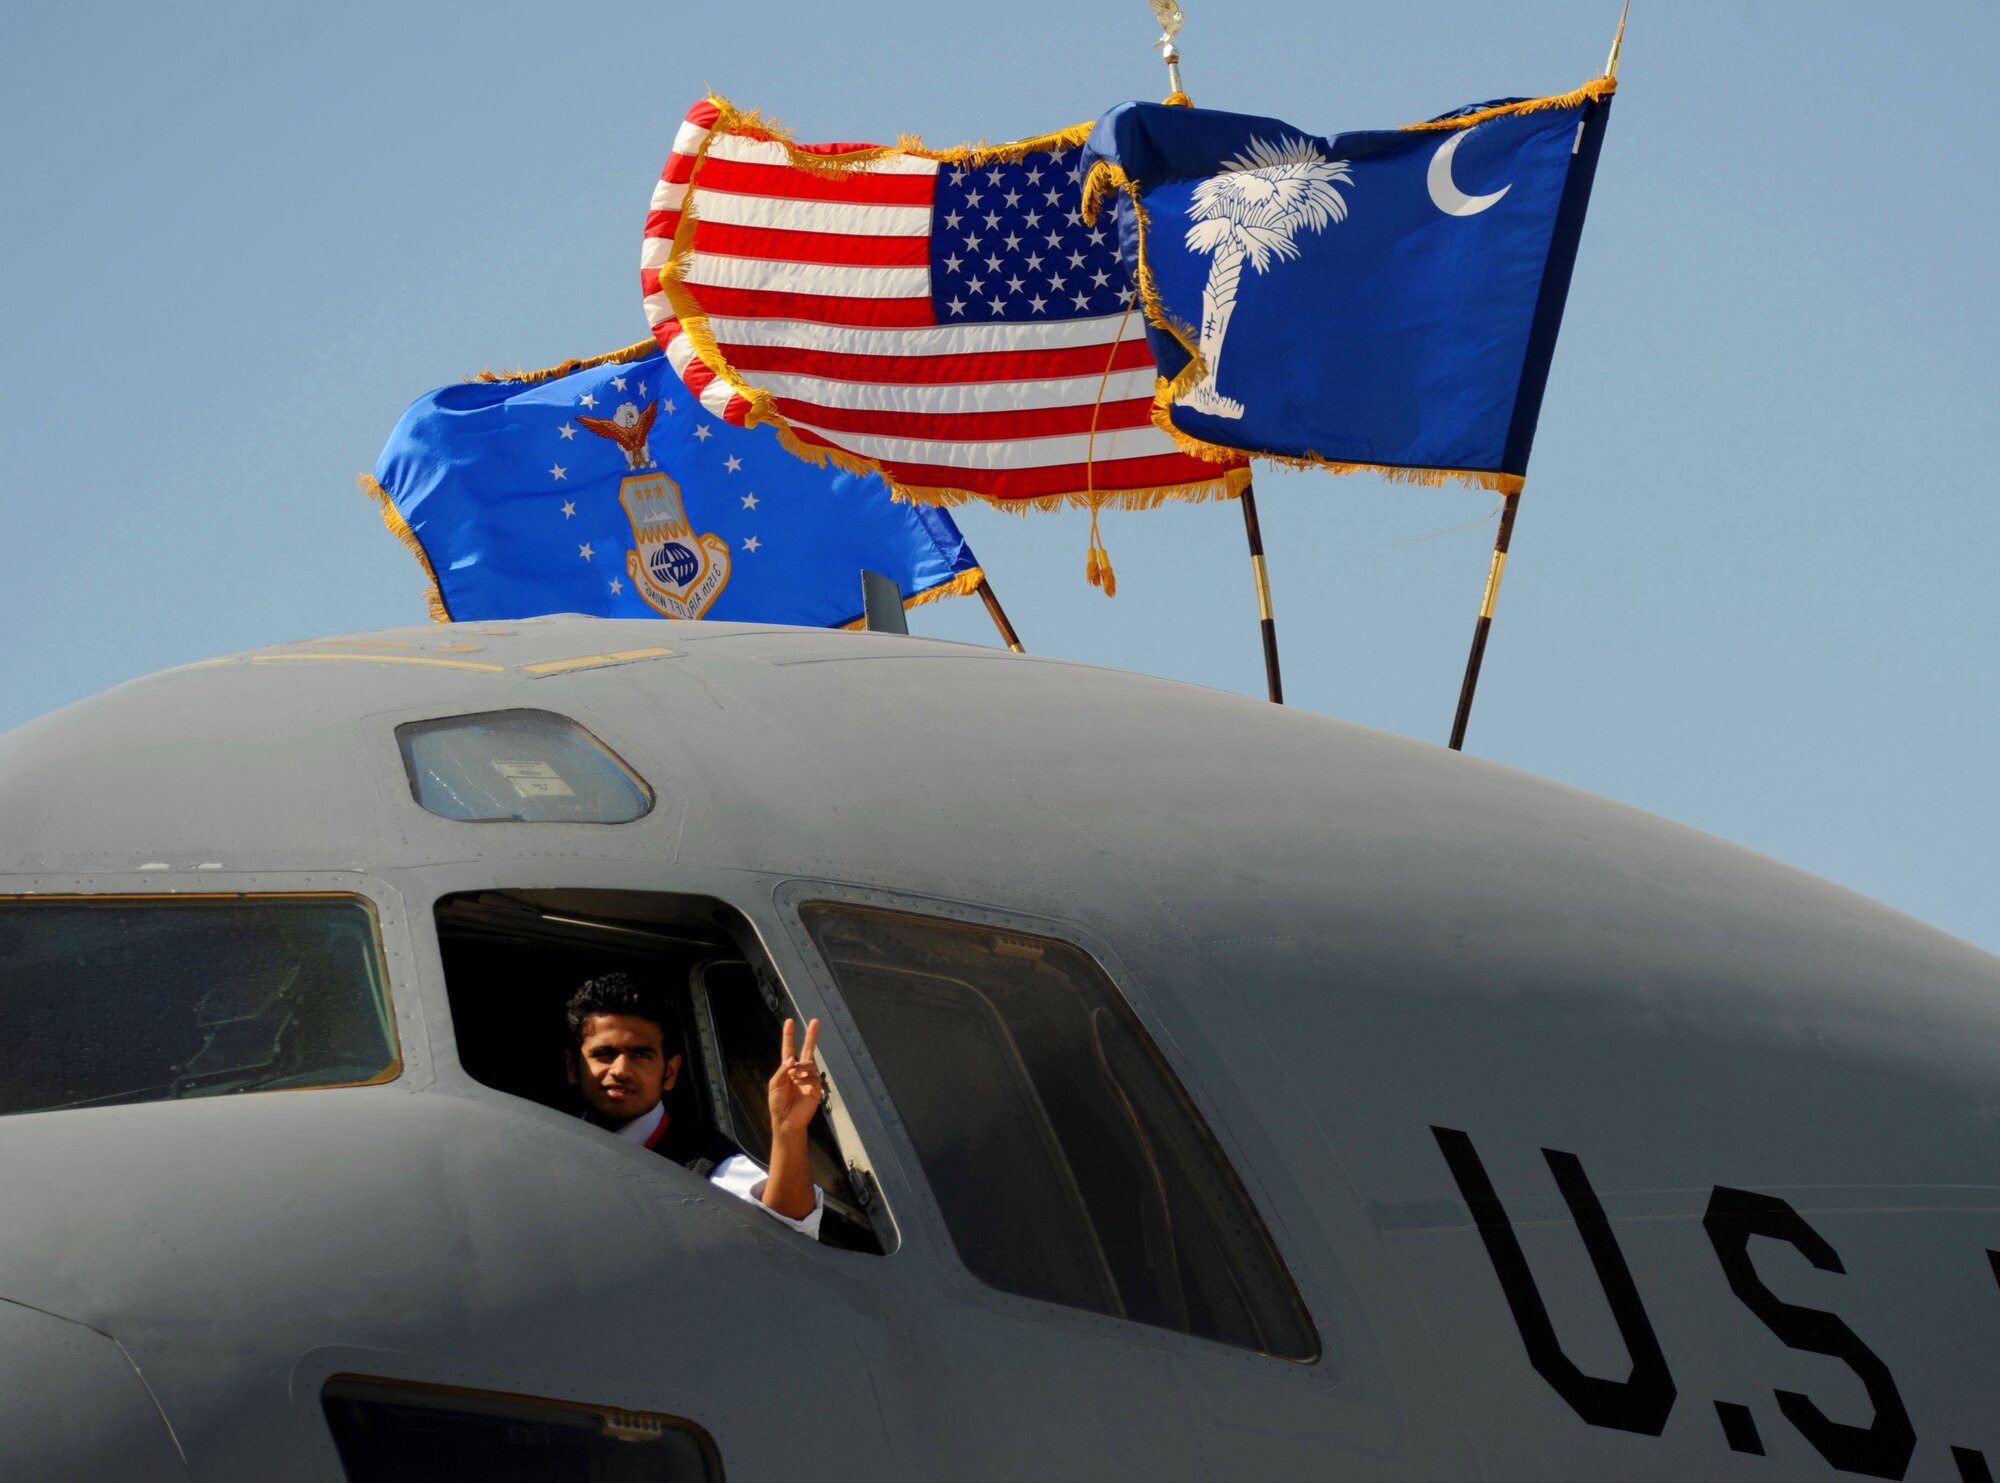 A local Bahraini boy looks out of a U.S. Air Force C-17 Globemaster III while holding a "V for victory" gesture for his father during Bahrain's inaugural airshow, Jan. 23, 2010. (U.S. Air Force photo/Staff Sgt. Angelita Lawrence/released)

